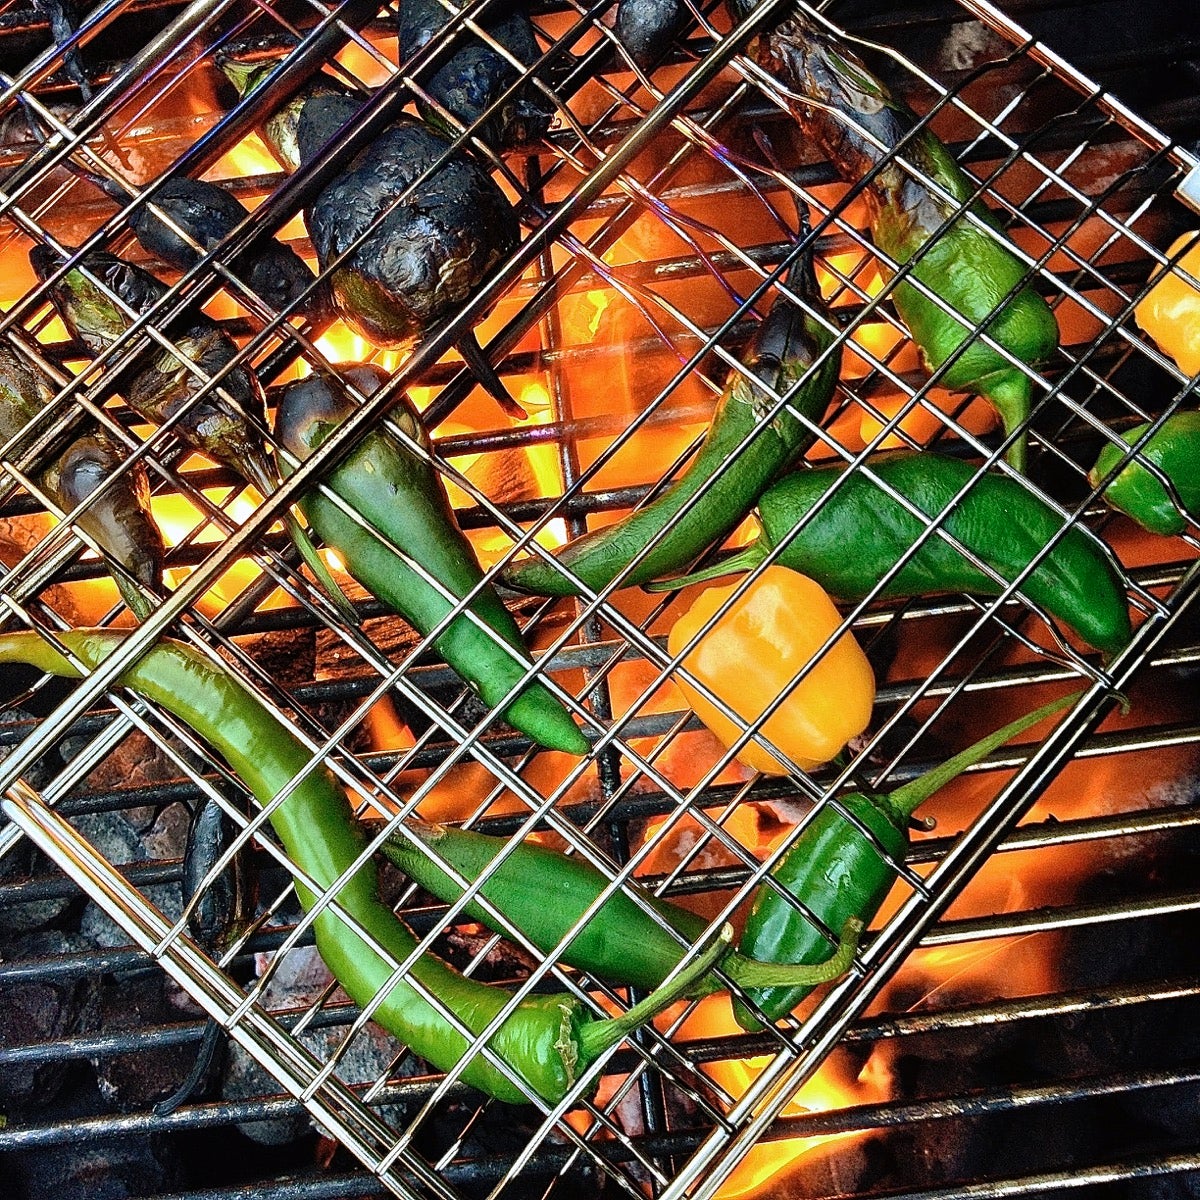 Serrano peppers and small yellow bell peppers charring on an open-flame grill.